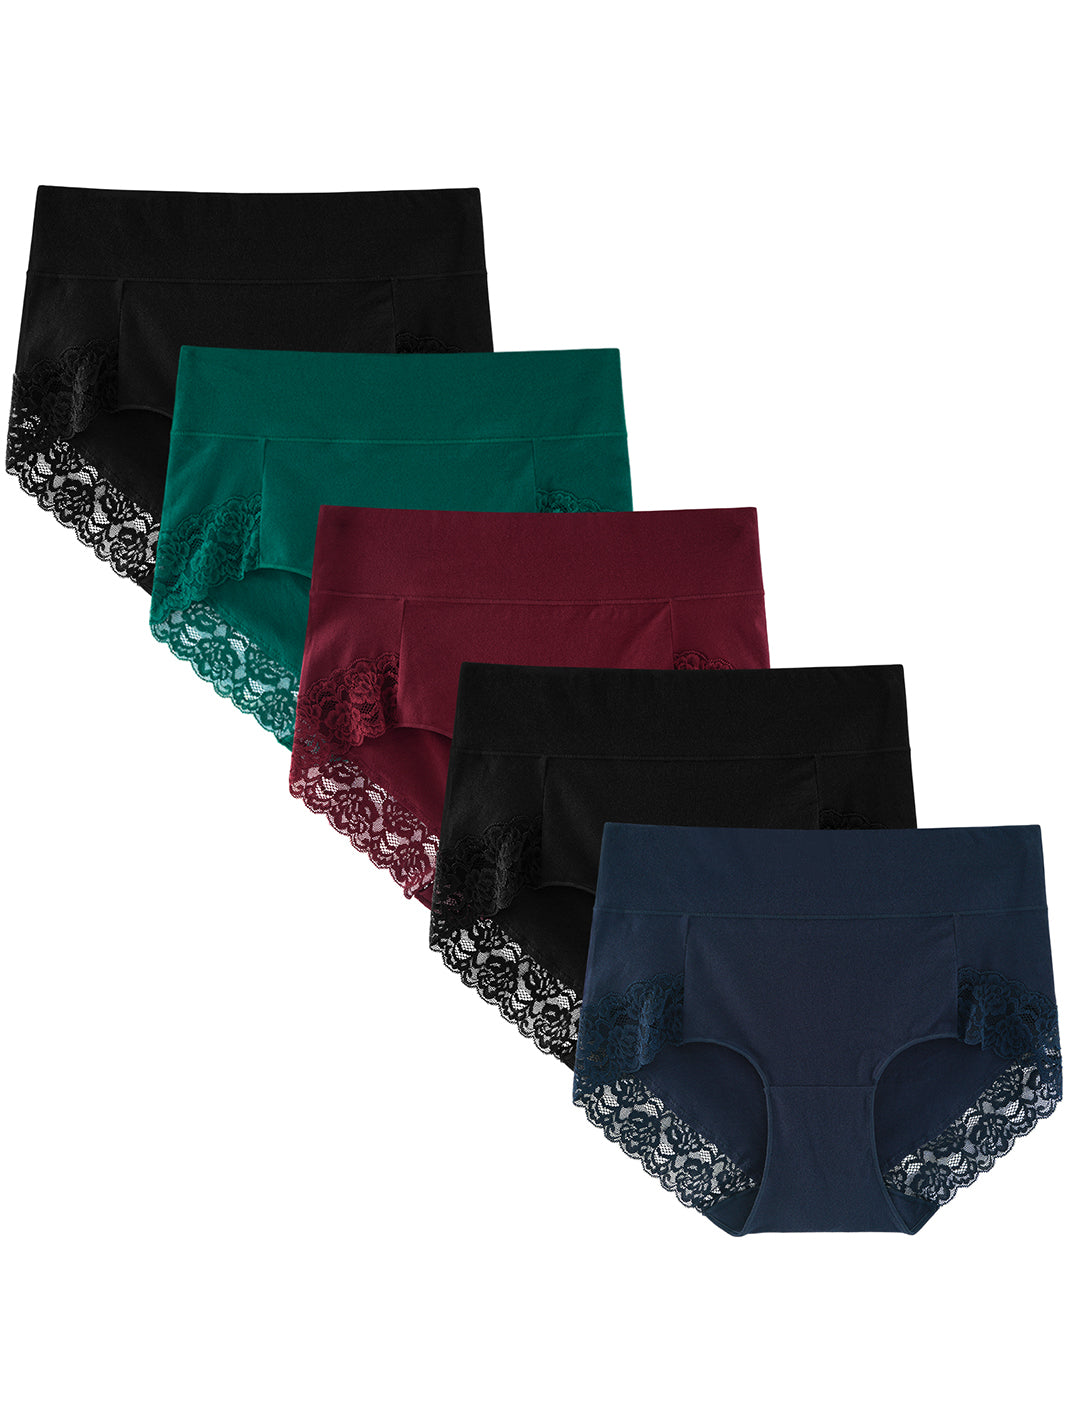 Women's Lace Trim High Waisted Briefs 5-Pack